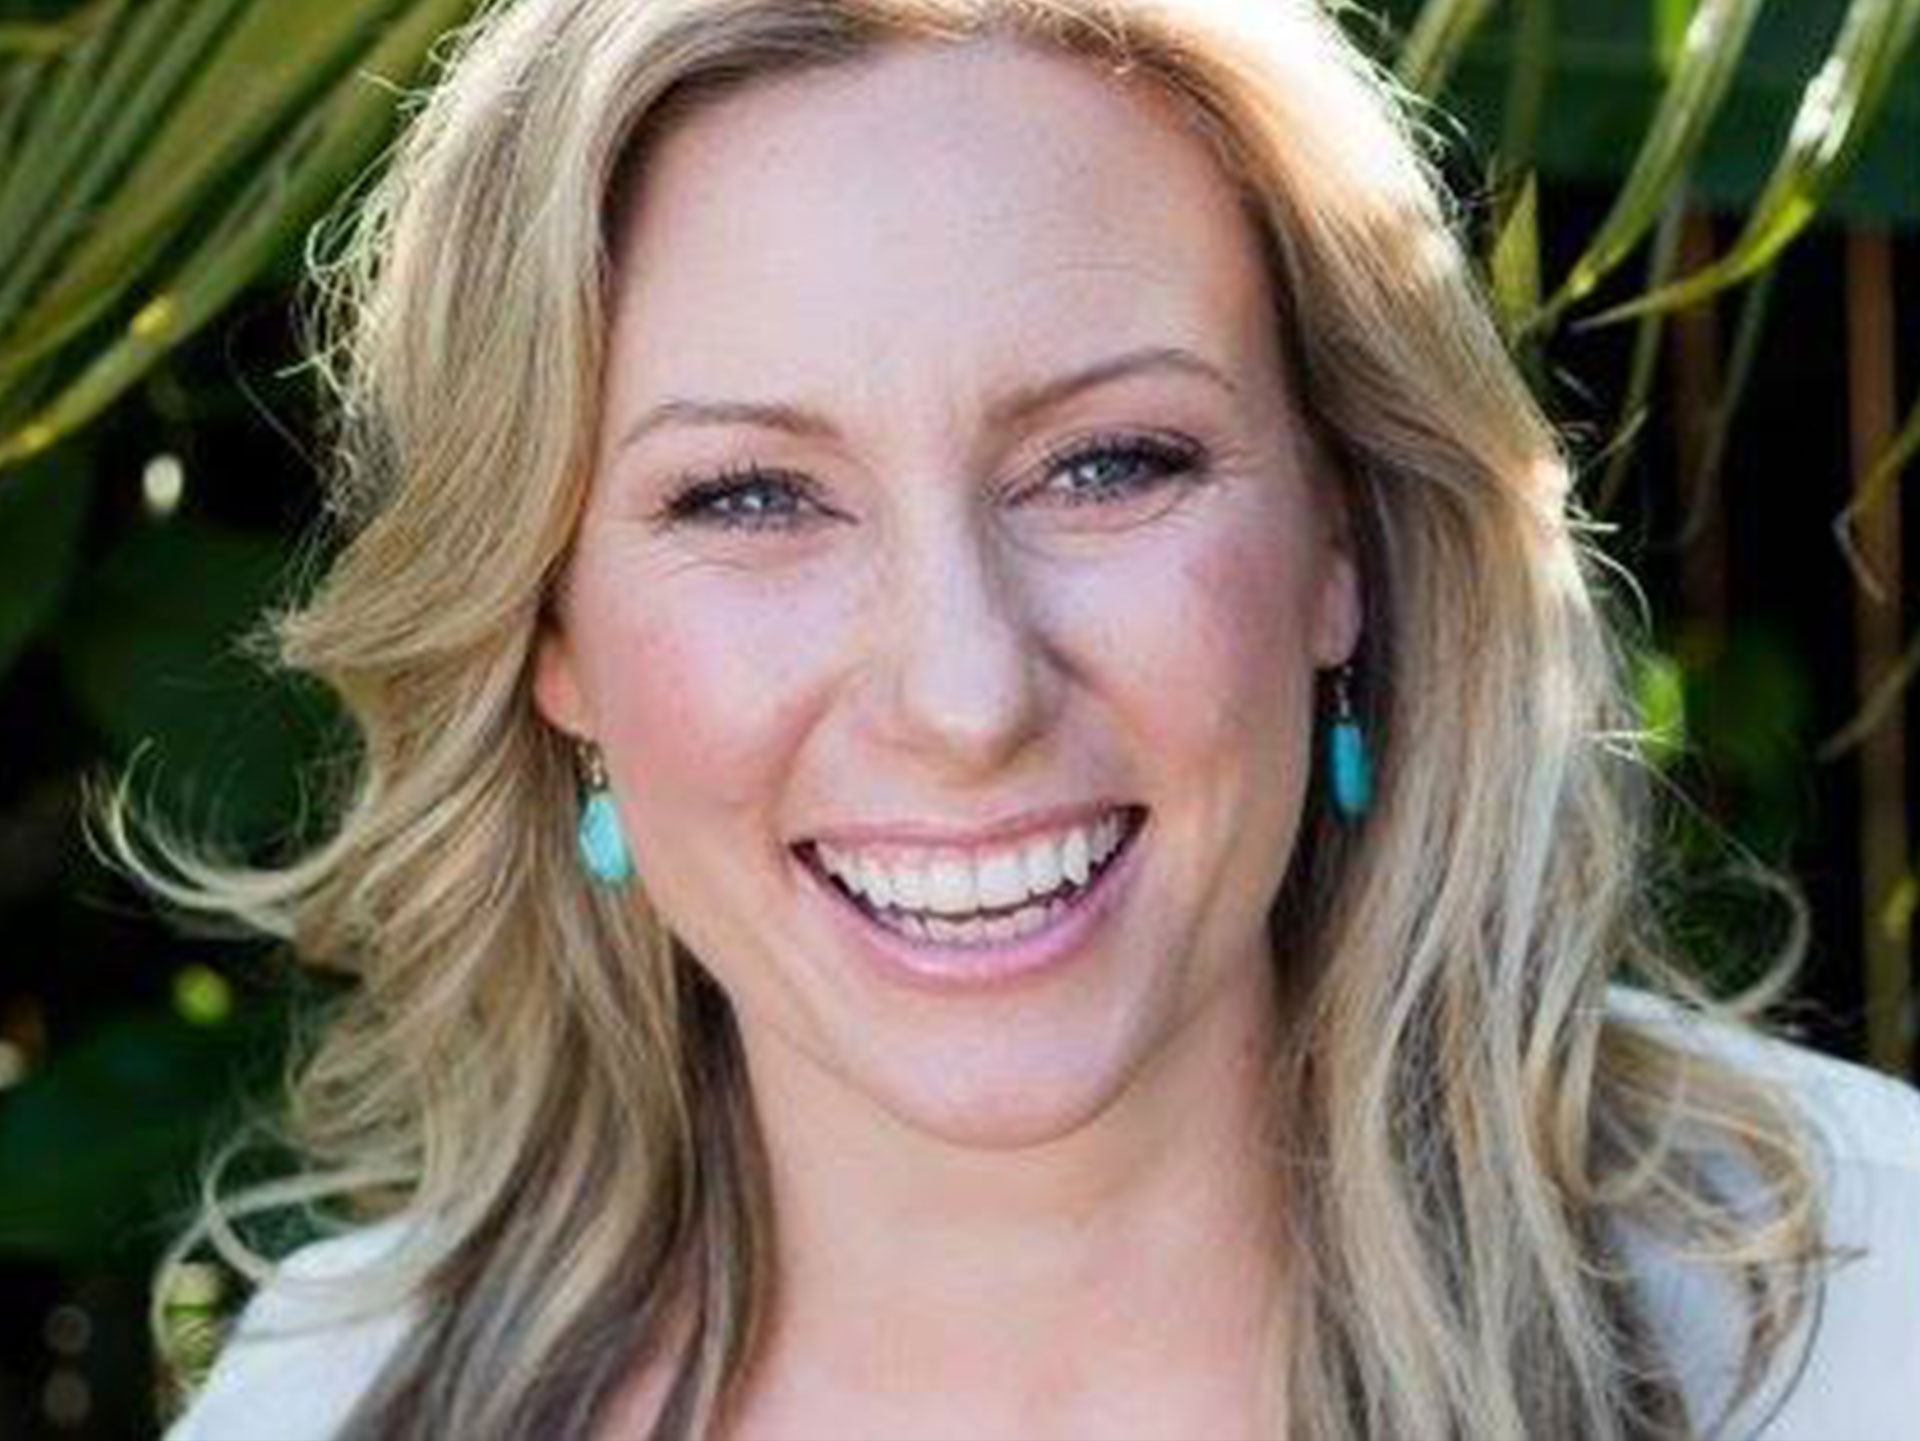 Investigation into Justine Damond's shooting complete